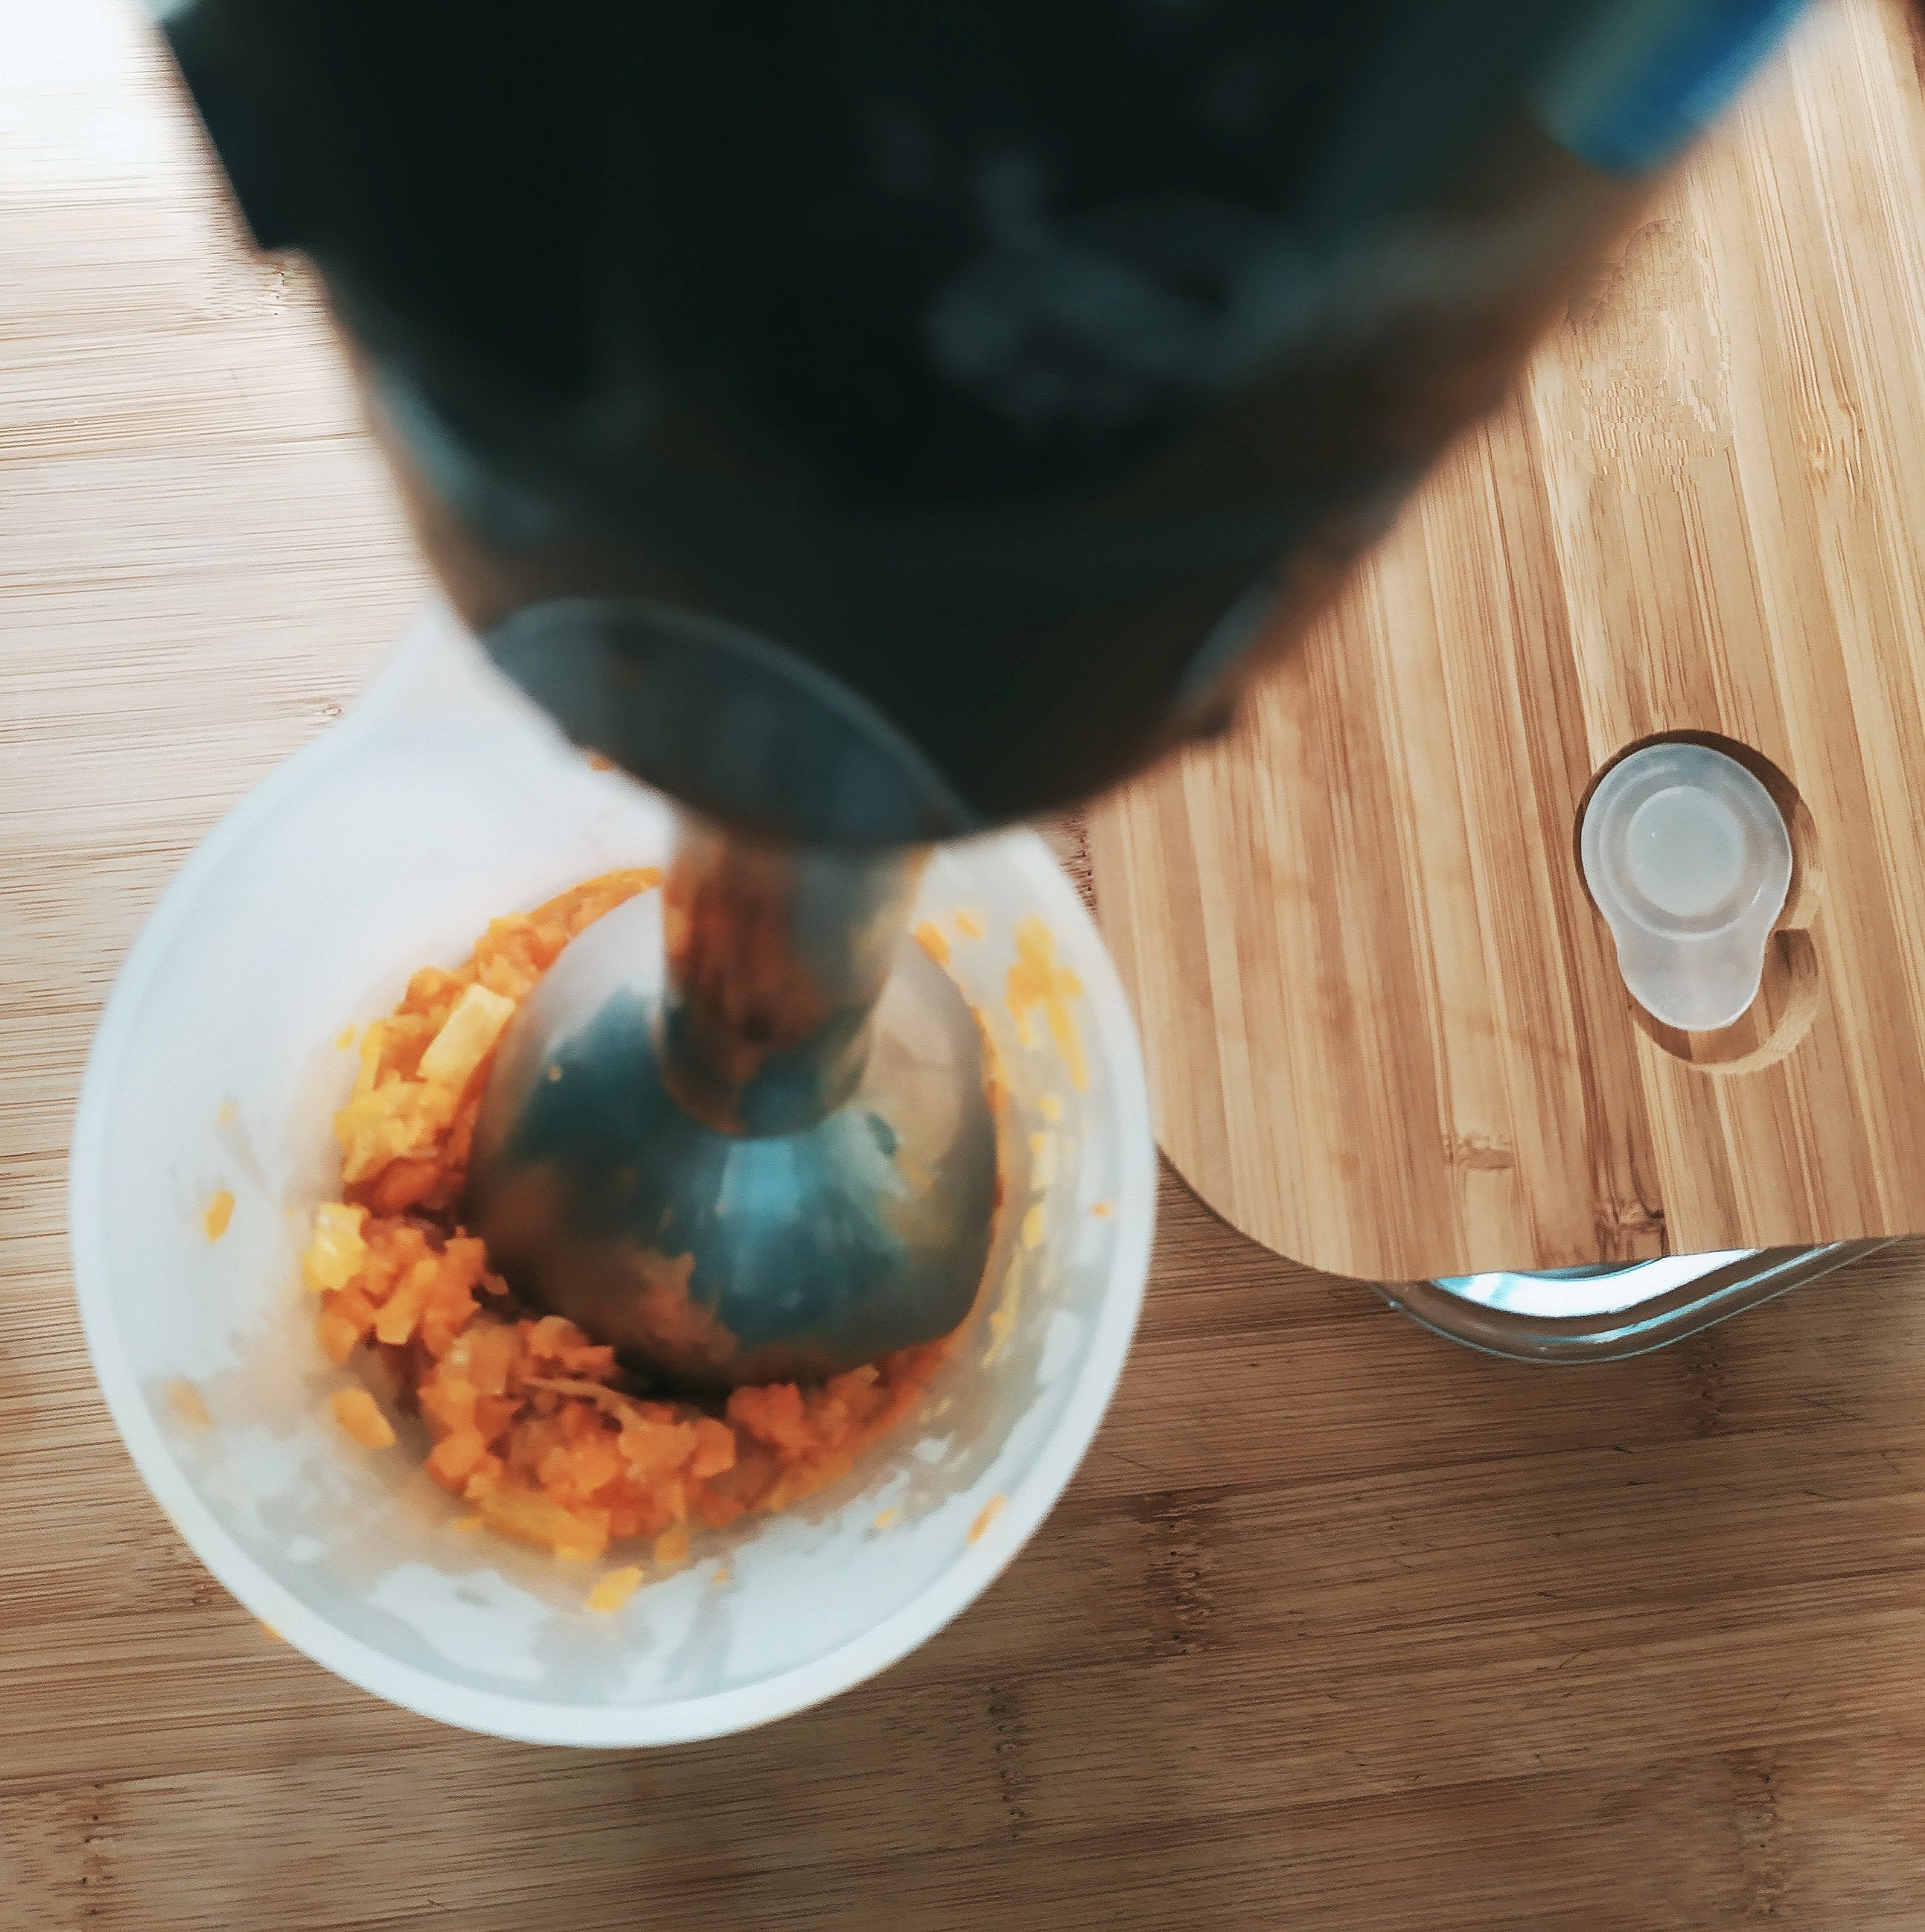 using an immersion blender to blend up food